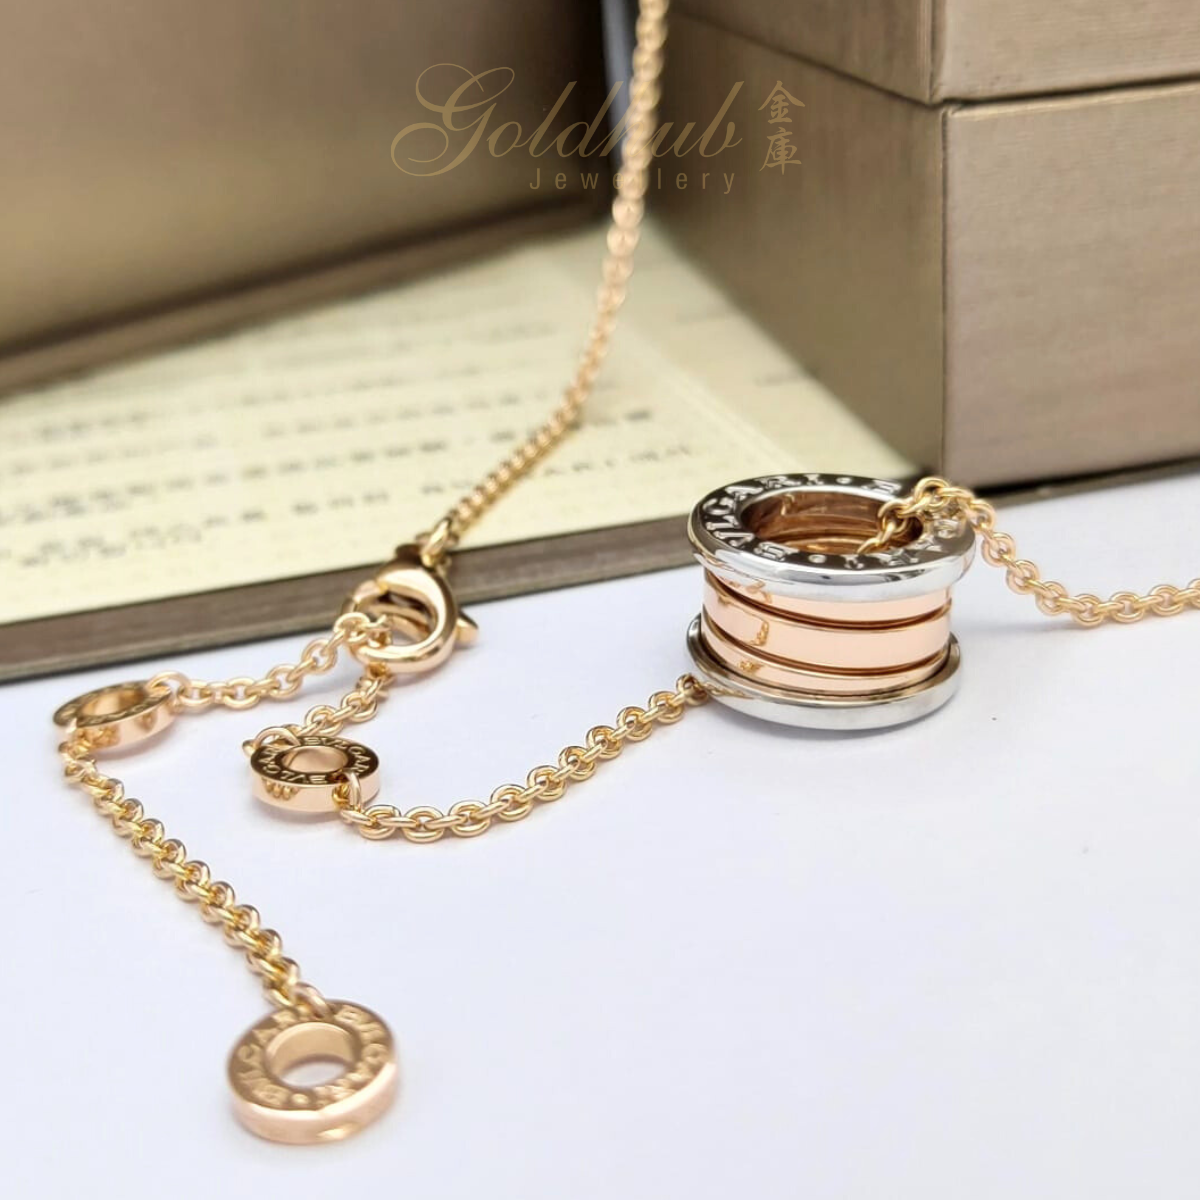 18k Pre-loved Bvlgari B.zero1 Necklace in White and Rose Gold